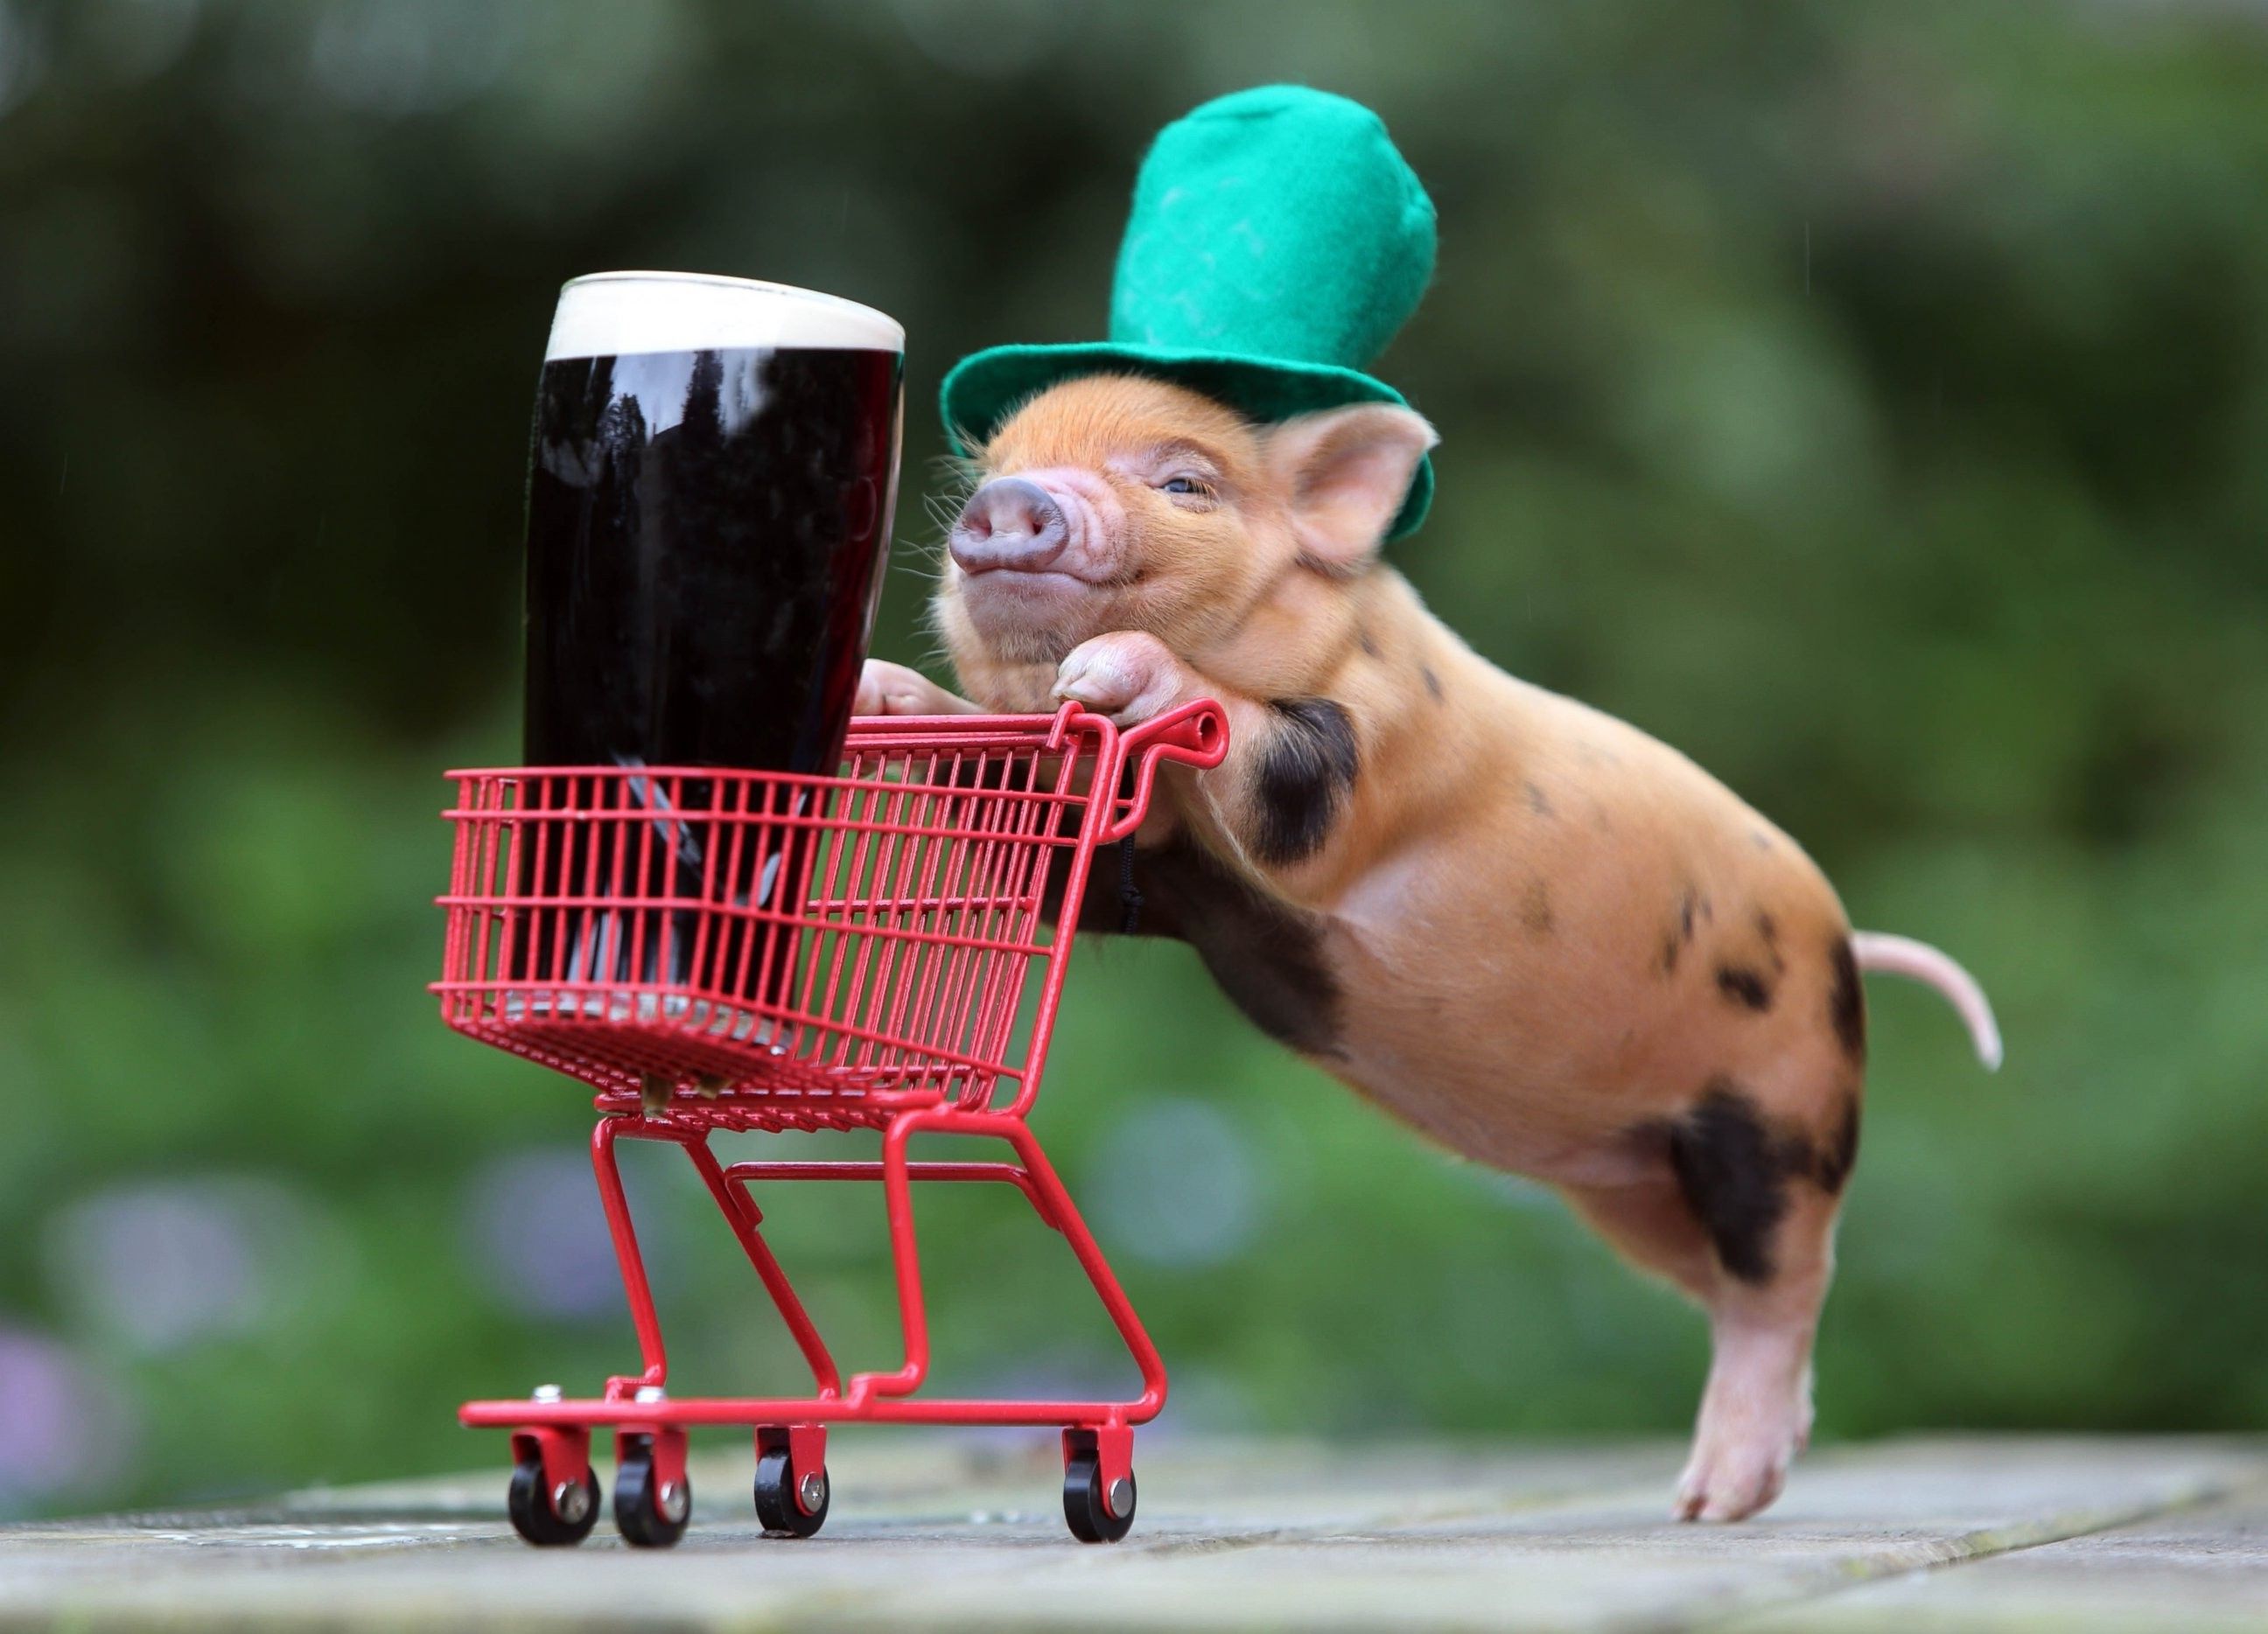 humor beer shopping cart funny hats baby animals pigs guinness top hats wallpaper